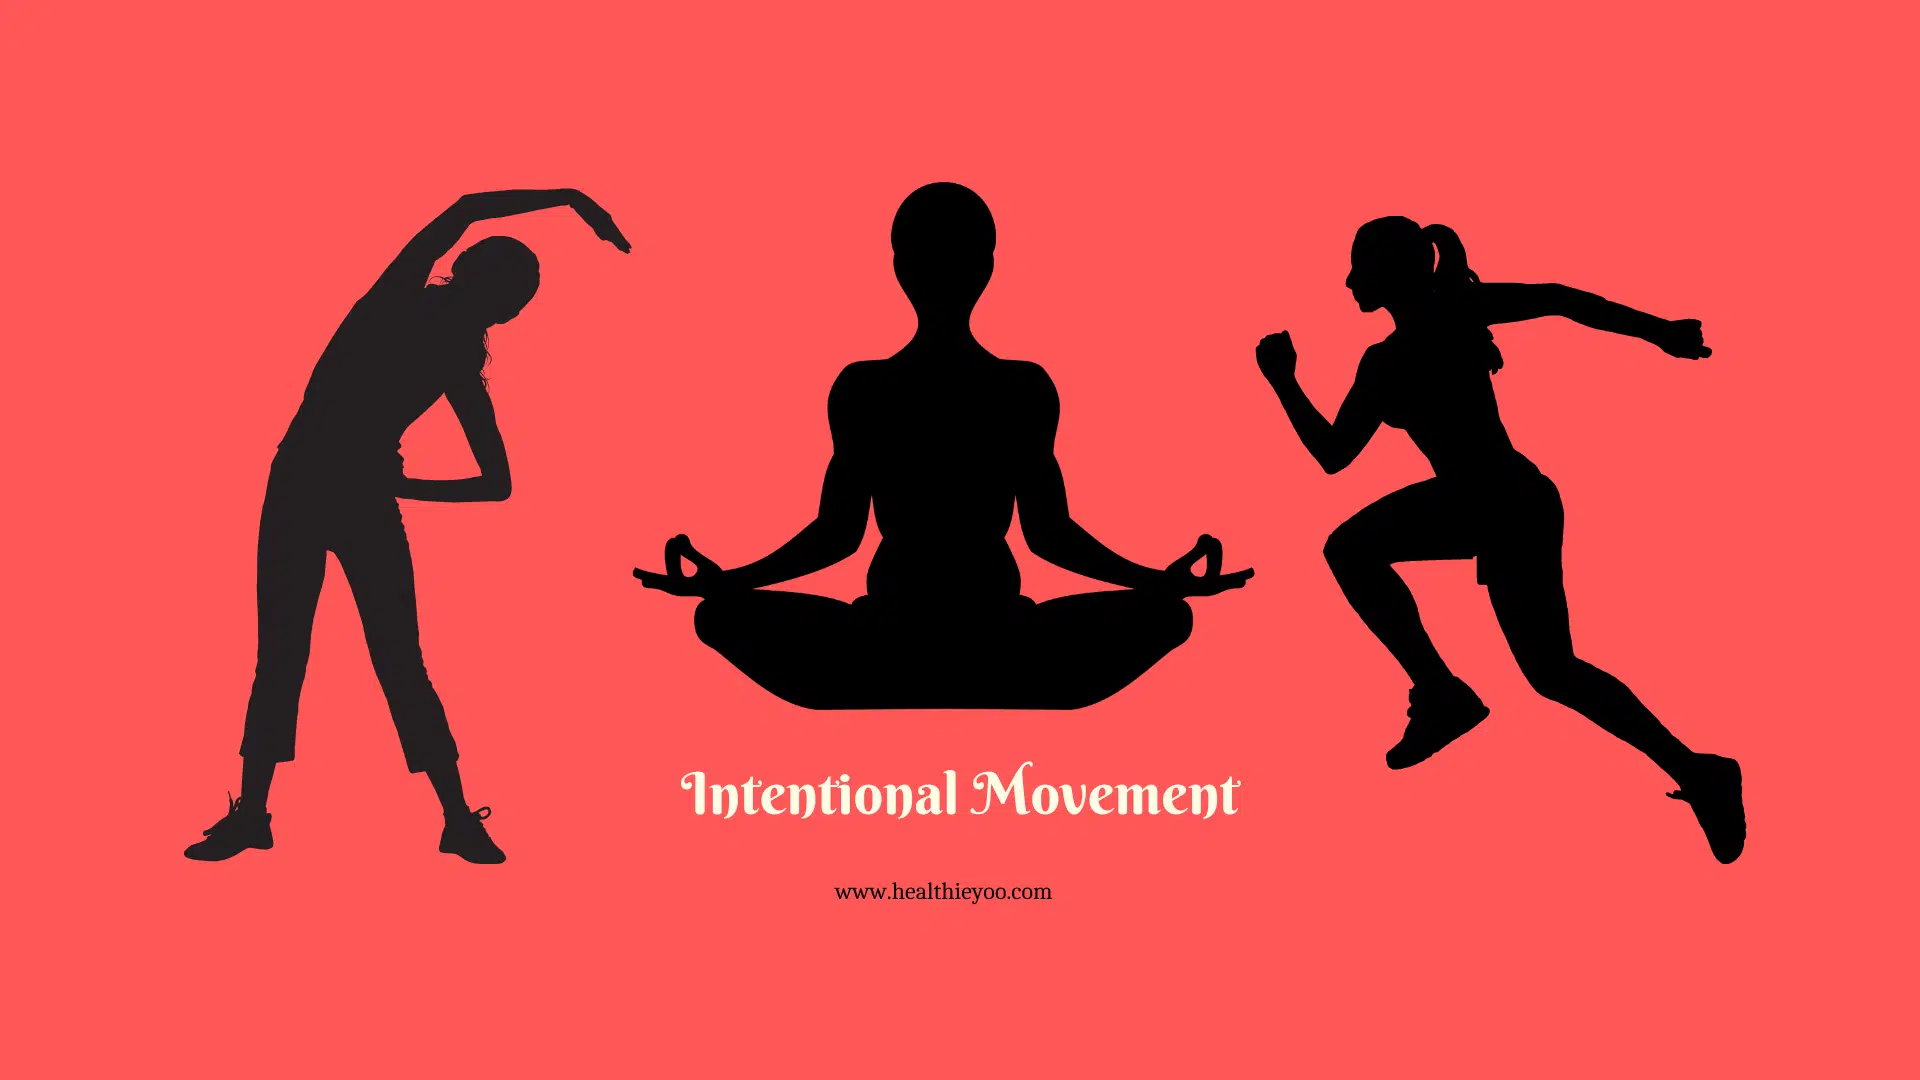 Intentional movement